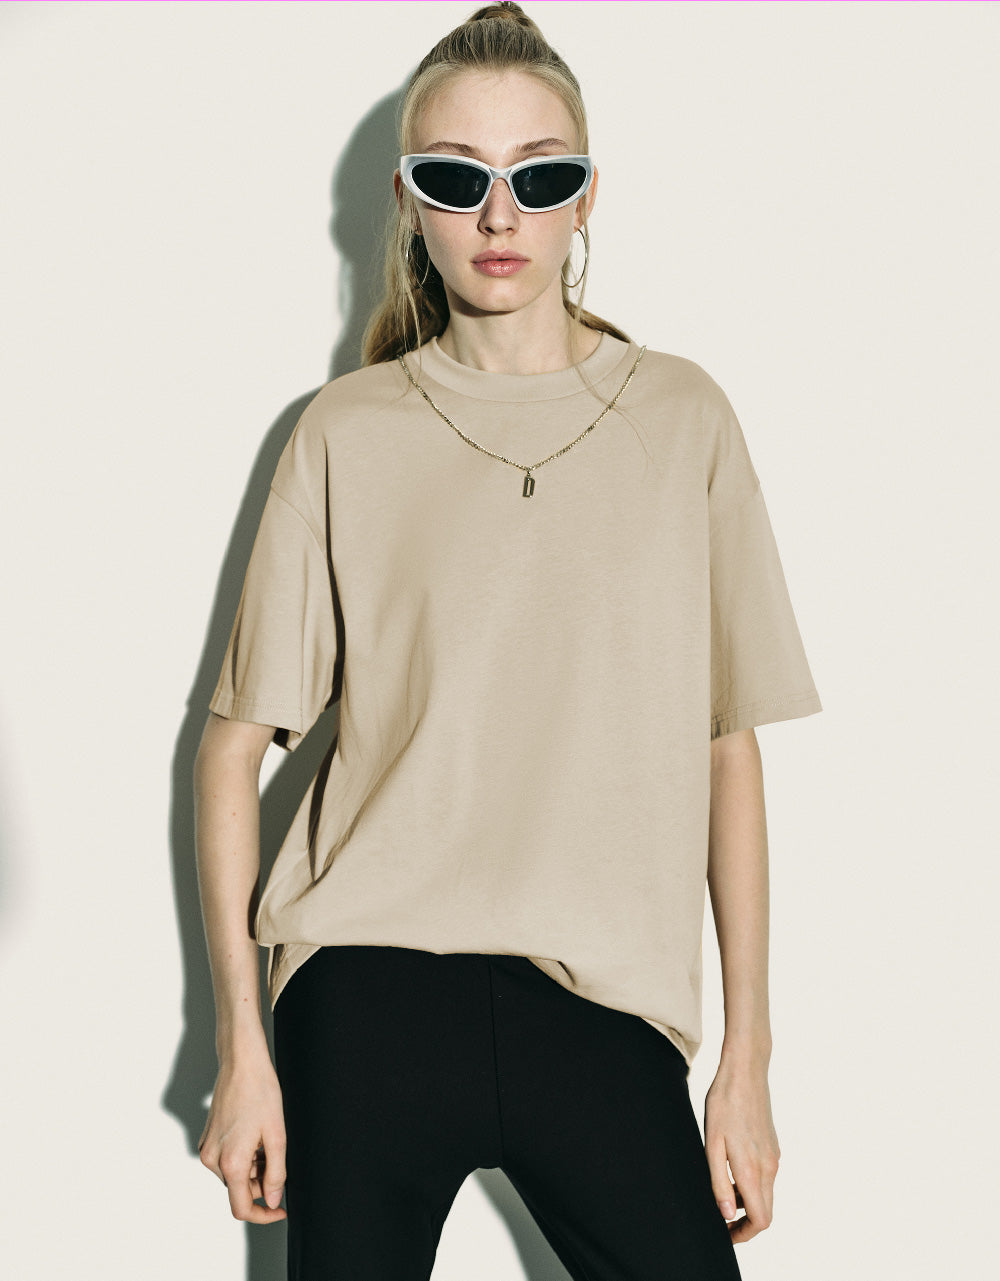 Regular T-Shirt With Necklace